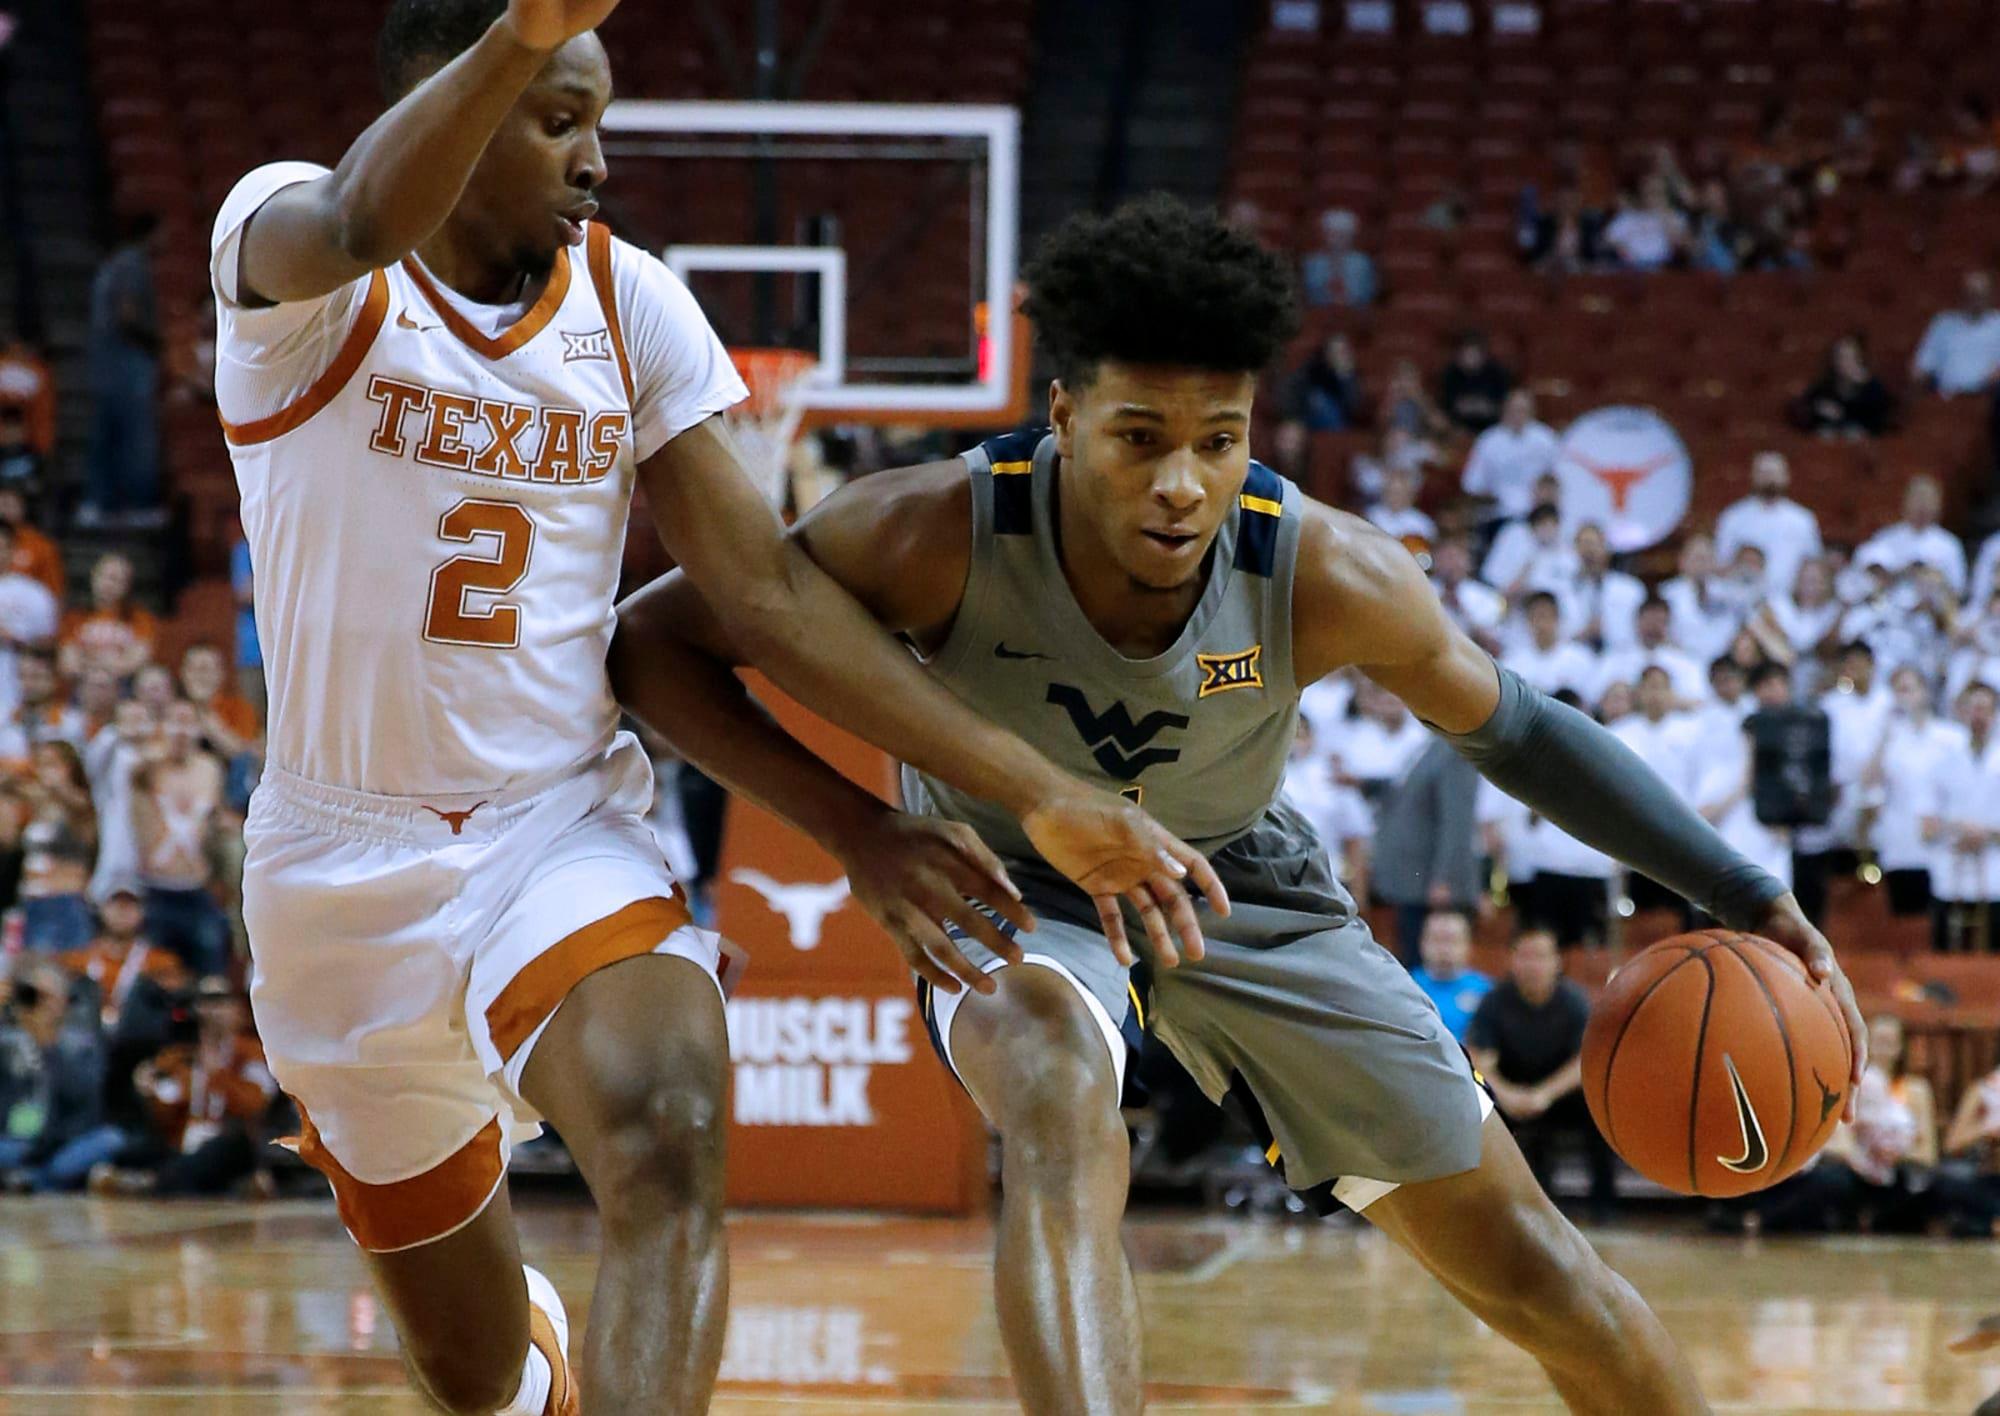 Texas vs. West Virginia Preview: Can the Longhorns Win Another Big Road Game?